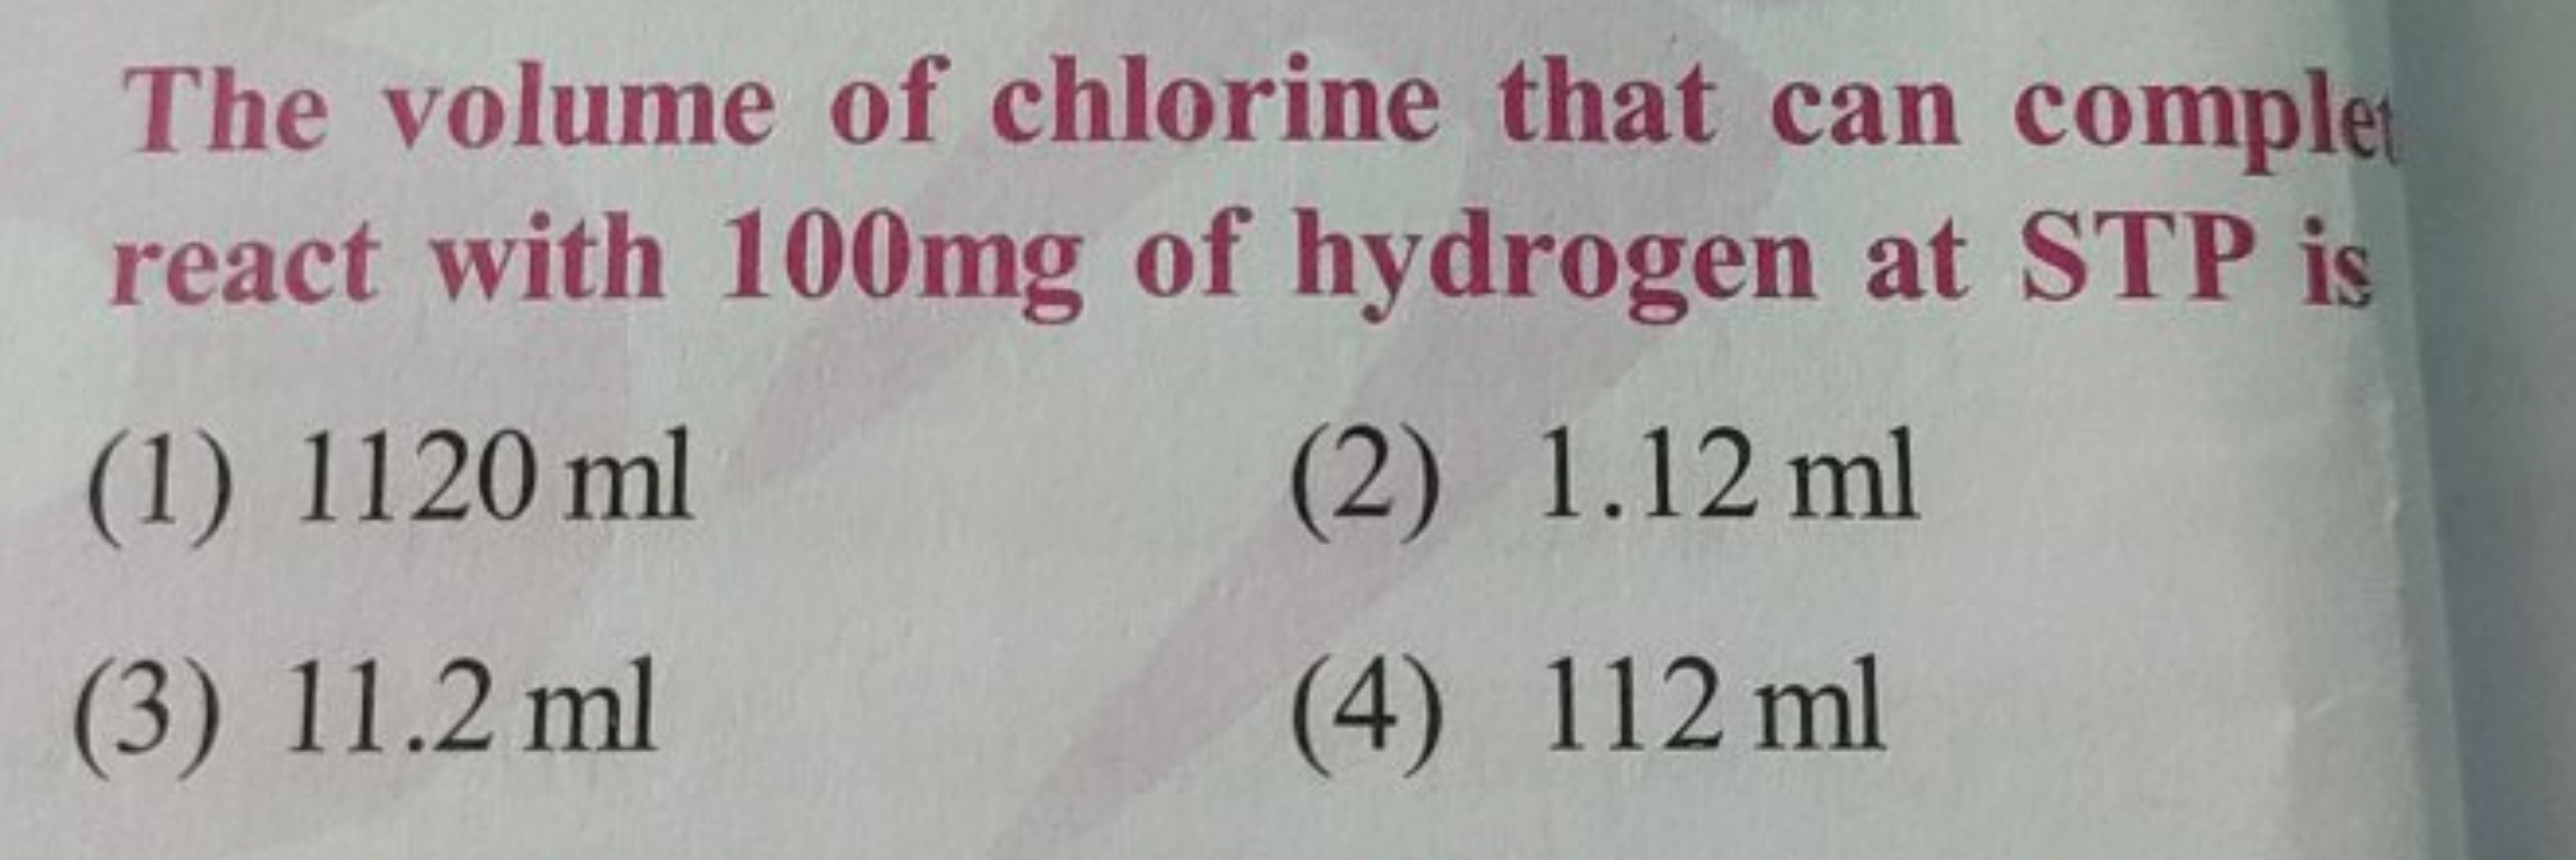 The volume of chlorine that can comple react with 100mg of hydrogen at